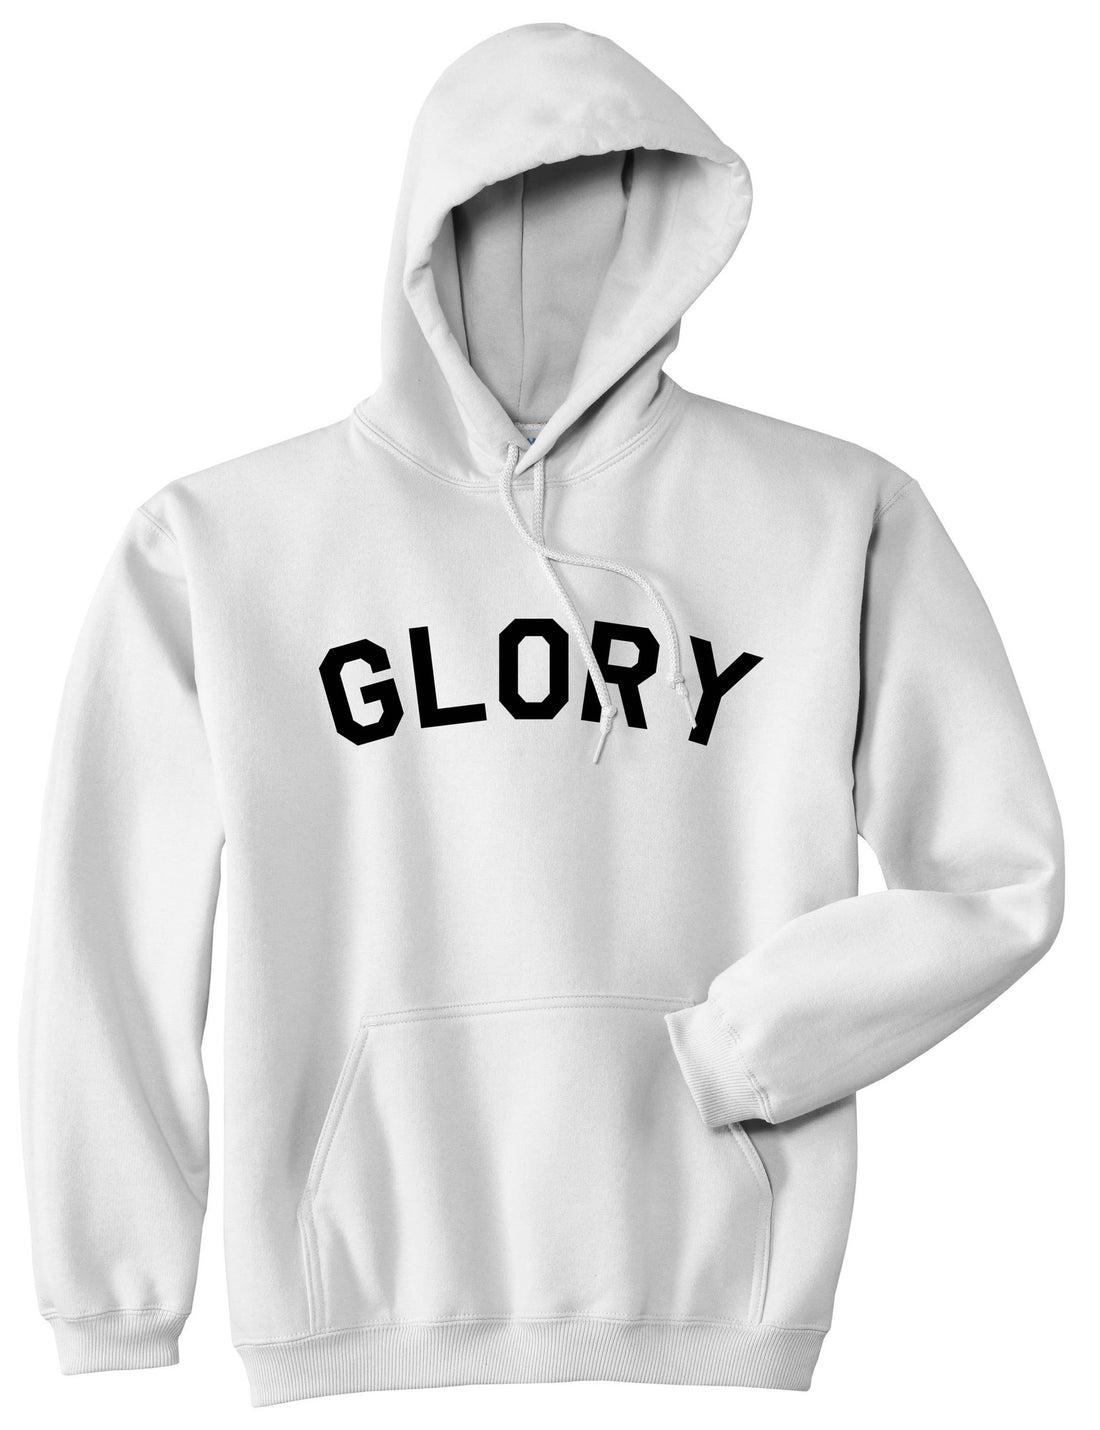 GLORY New York Champs Jersey Pullover Hoodie Hoody in White